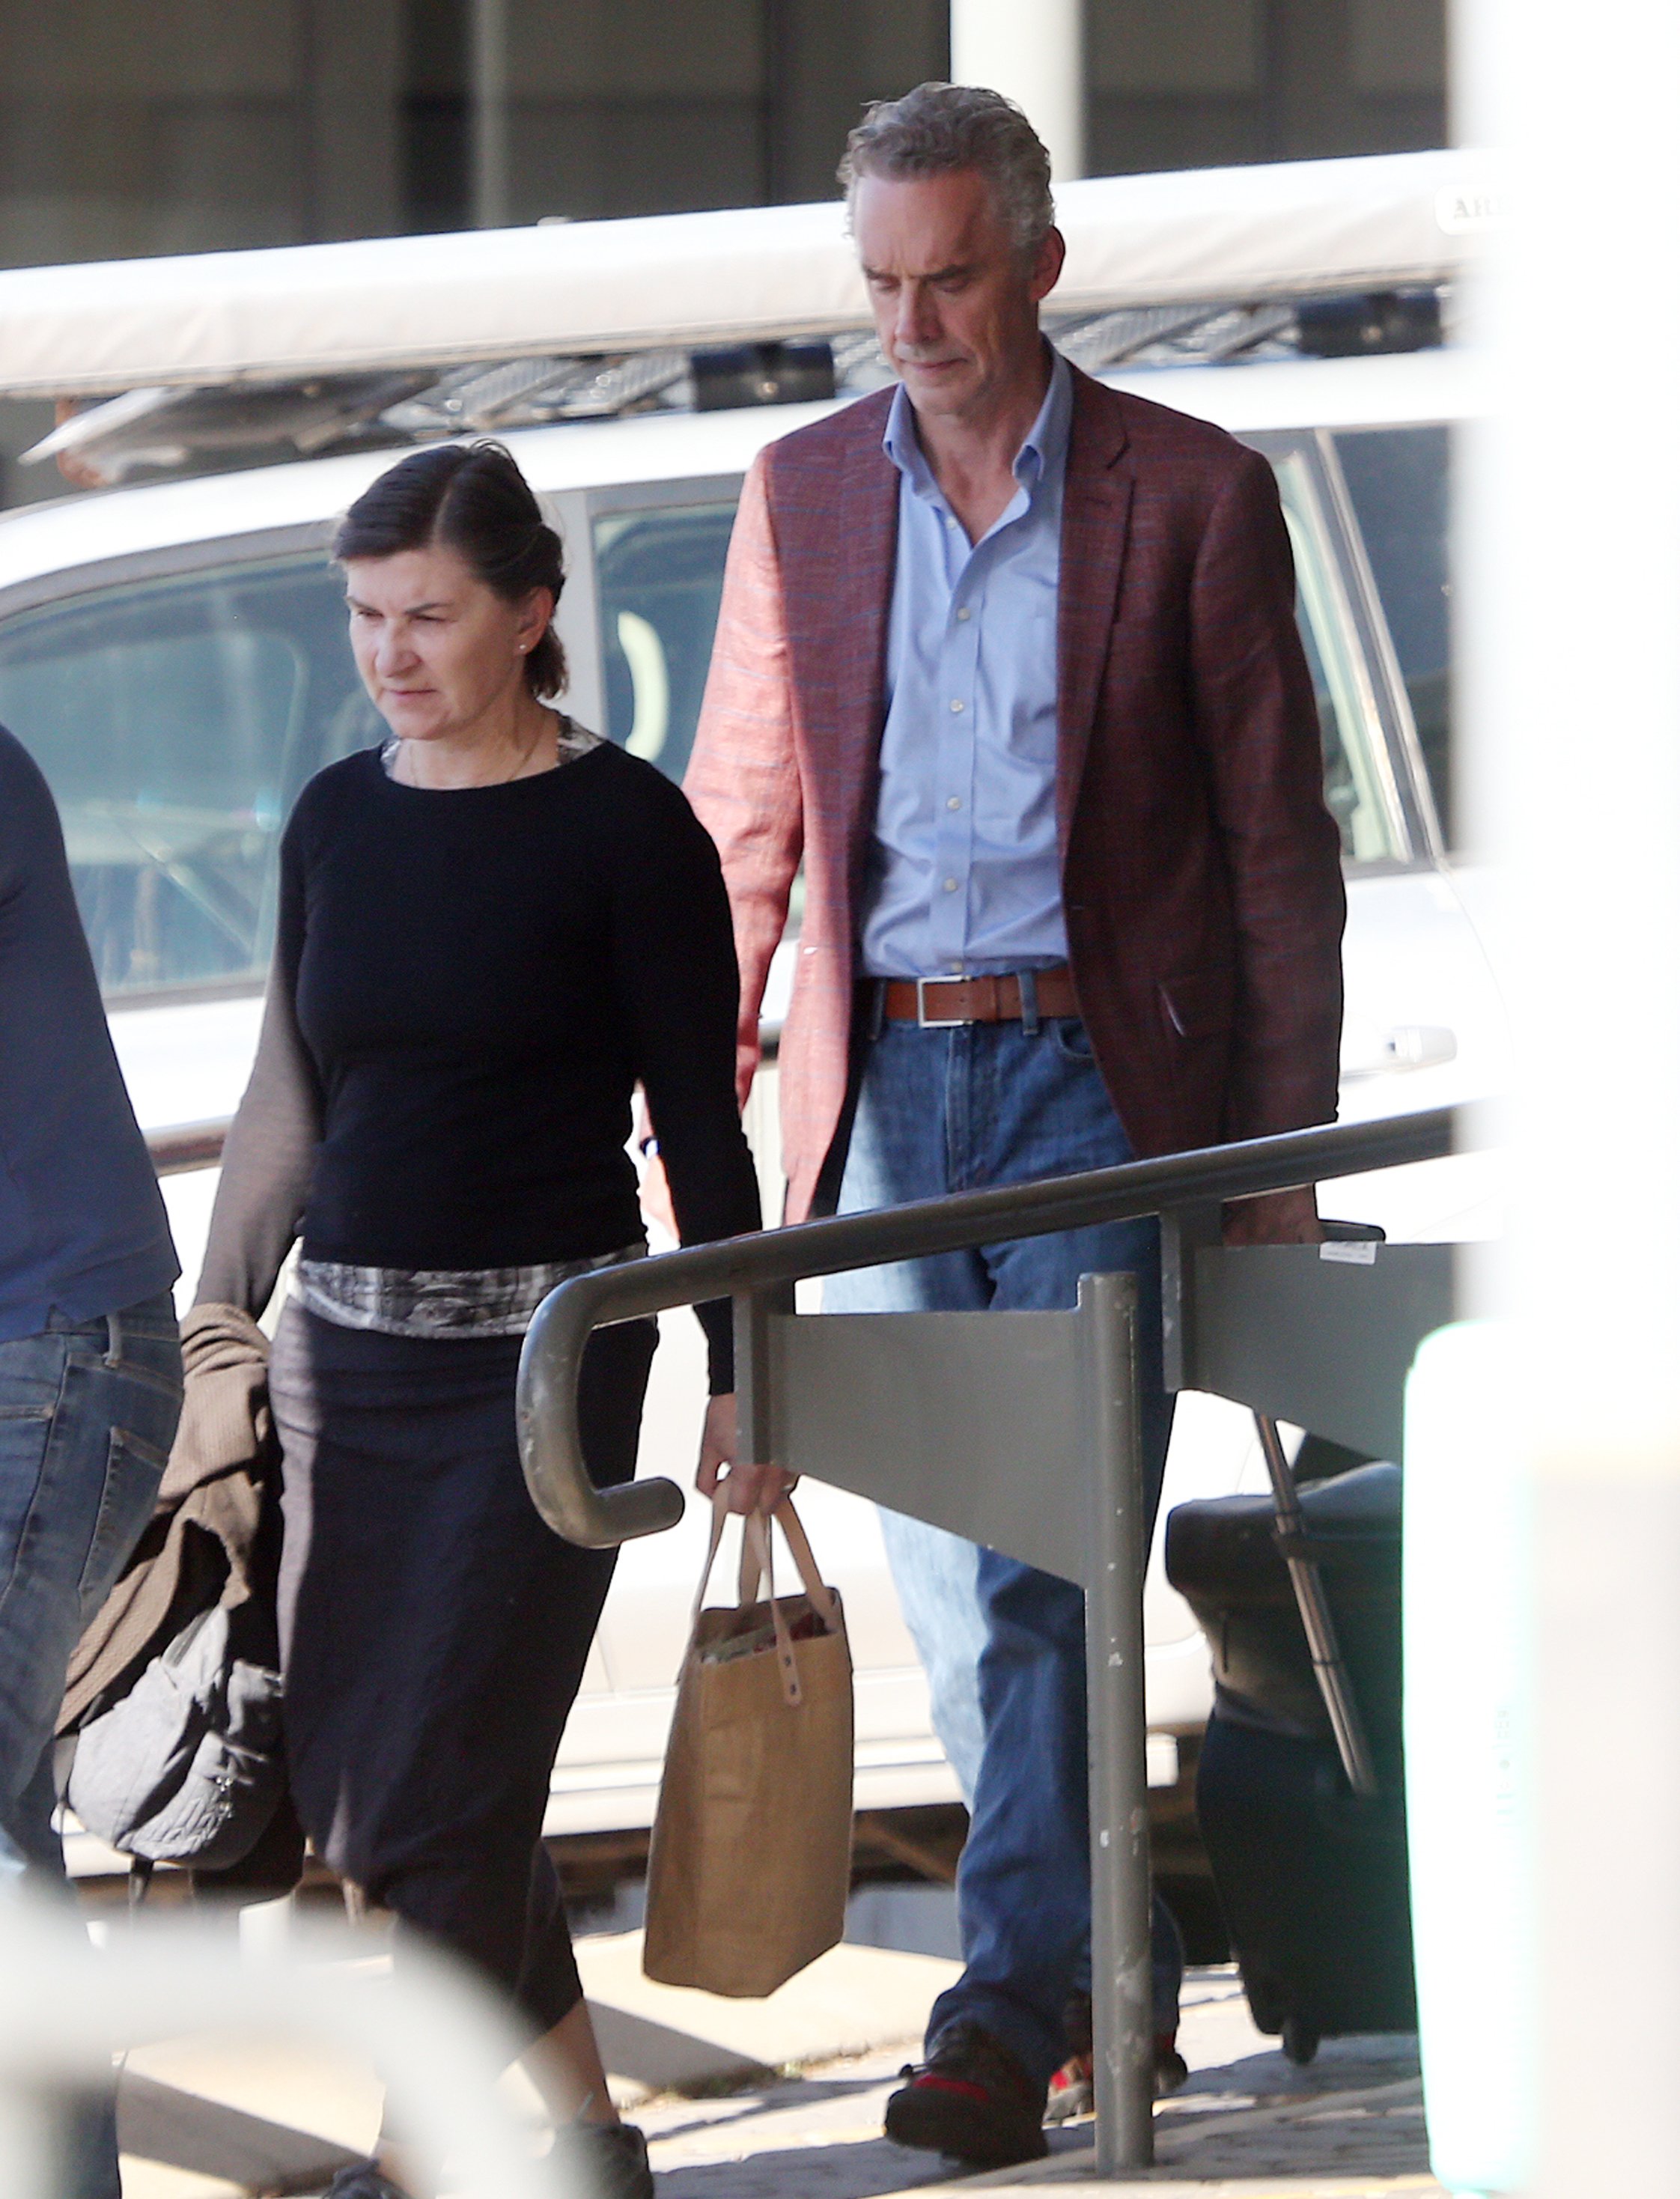 Jordan Peterson and Tammy Peterson are seen carrying their luggage at Perth Airport in Peth, Australia, on November 28, 2022. | Source: Getty Images